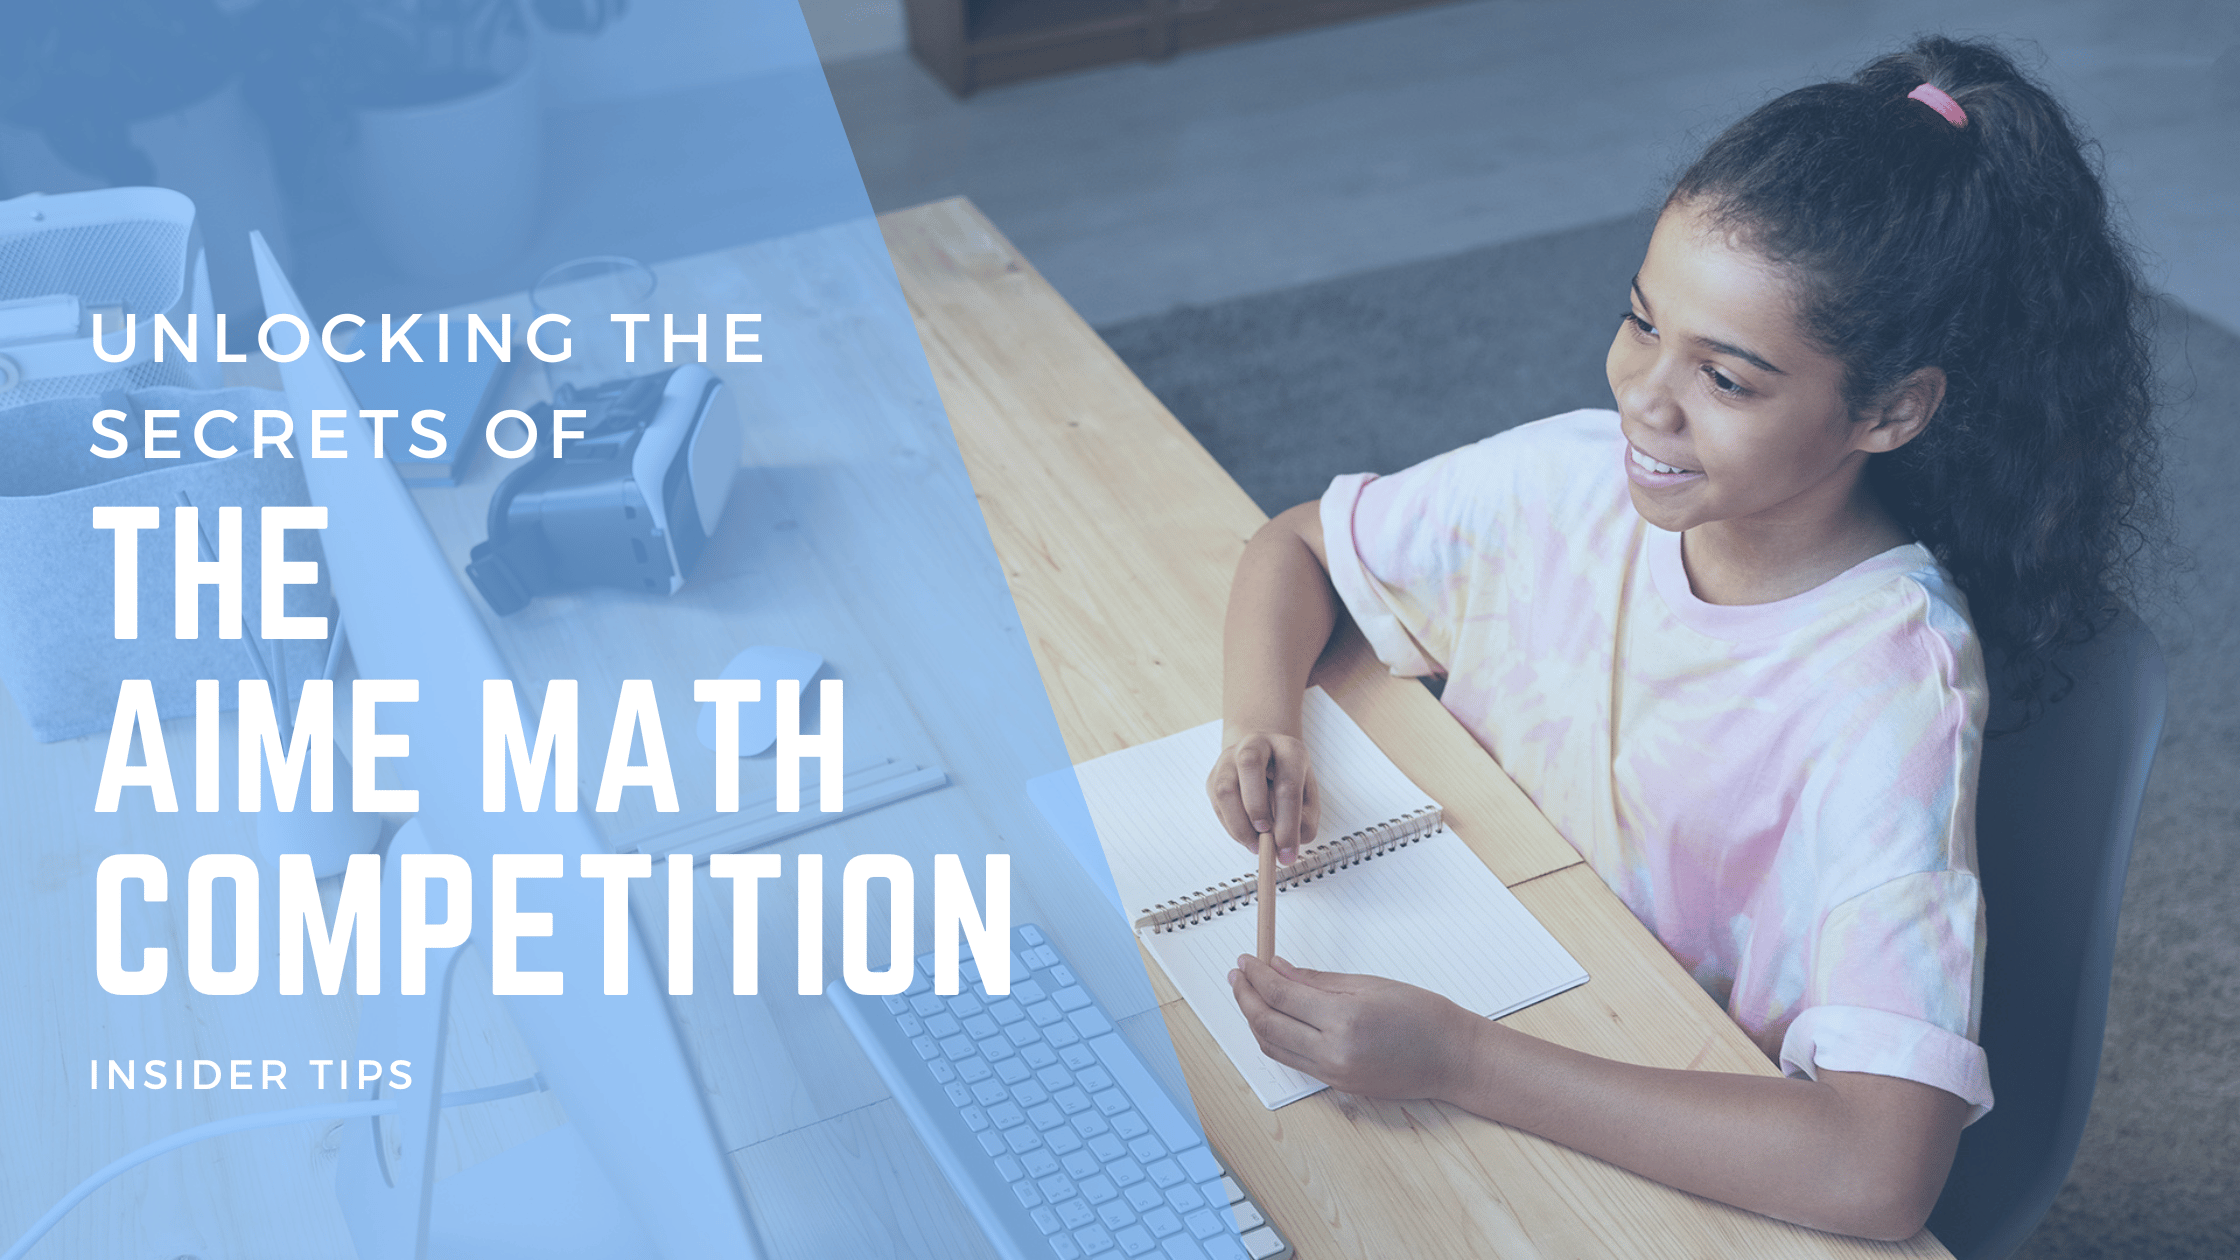 Unlocking the Secrets of AIME Math Competition Insider Tips